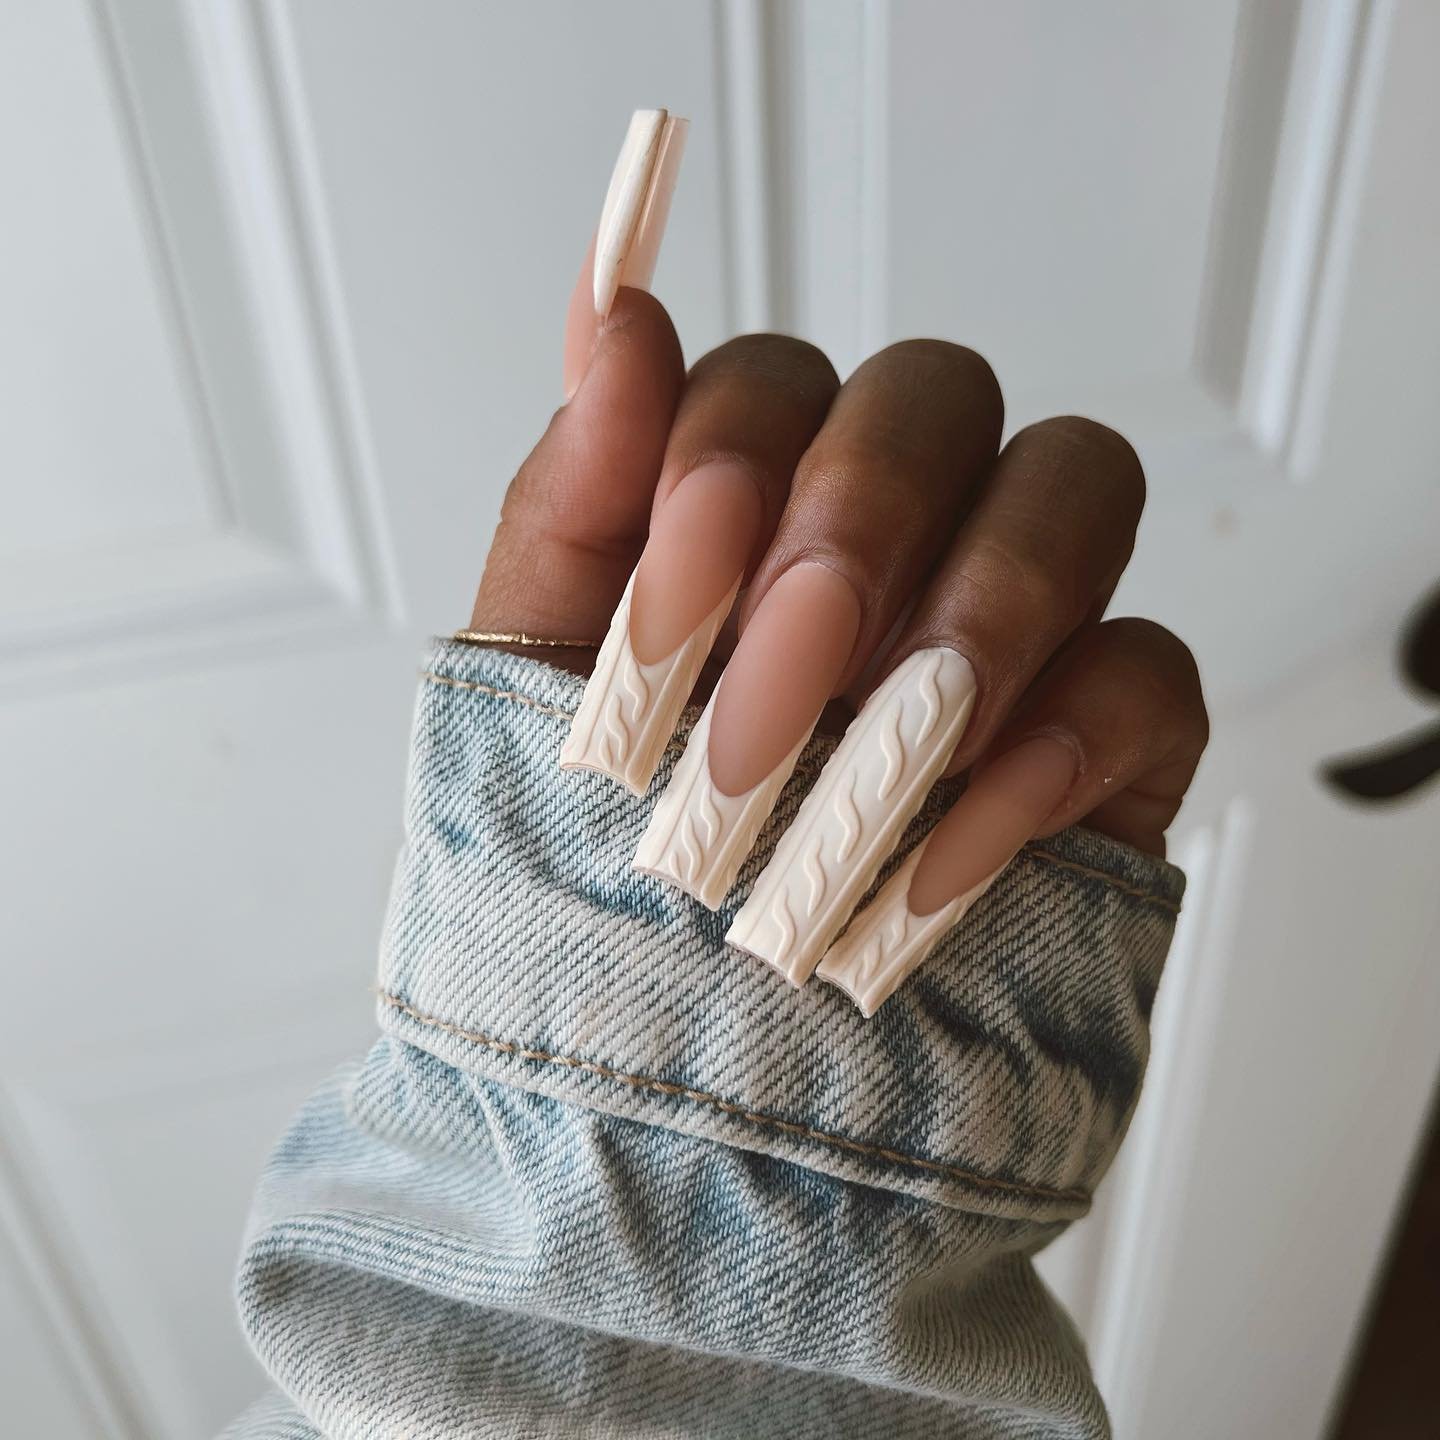 42 - Picture of French Tip Nails